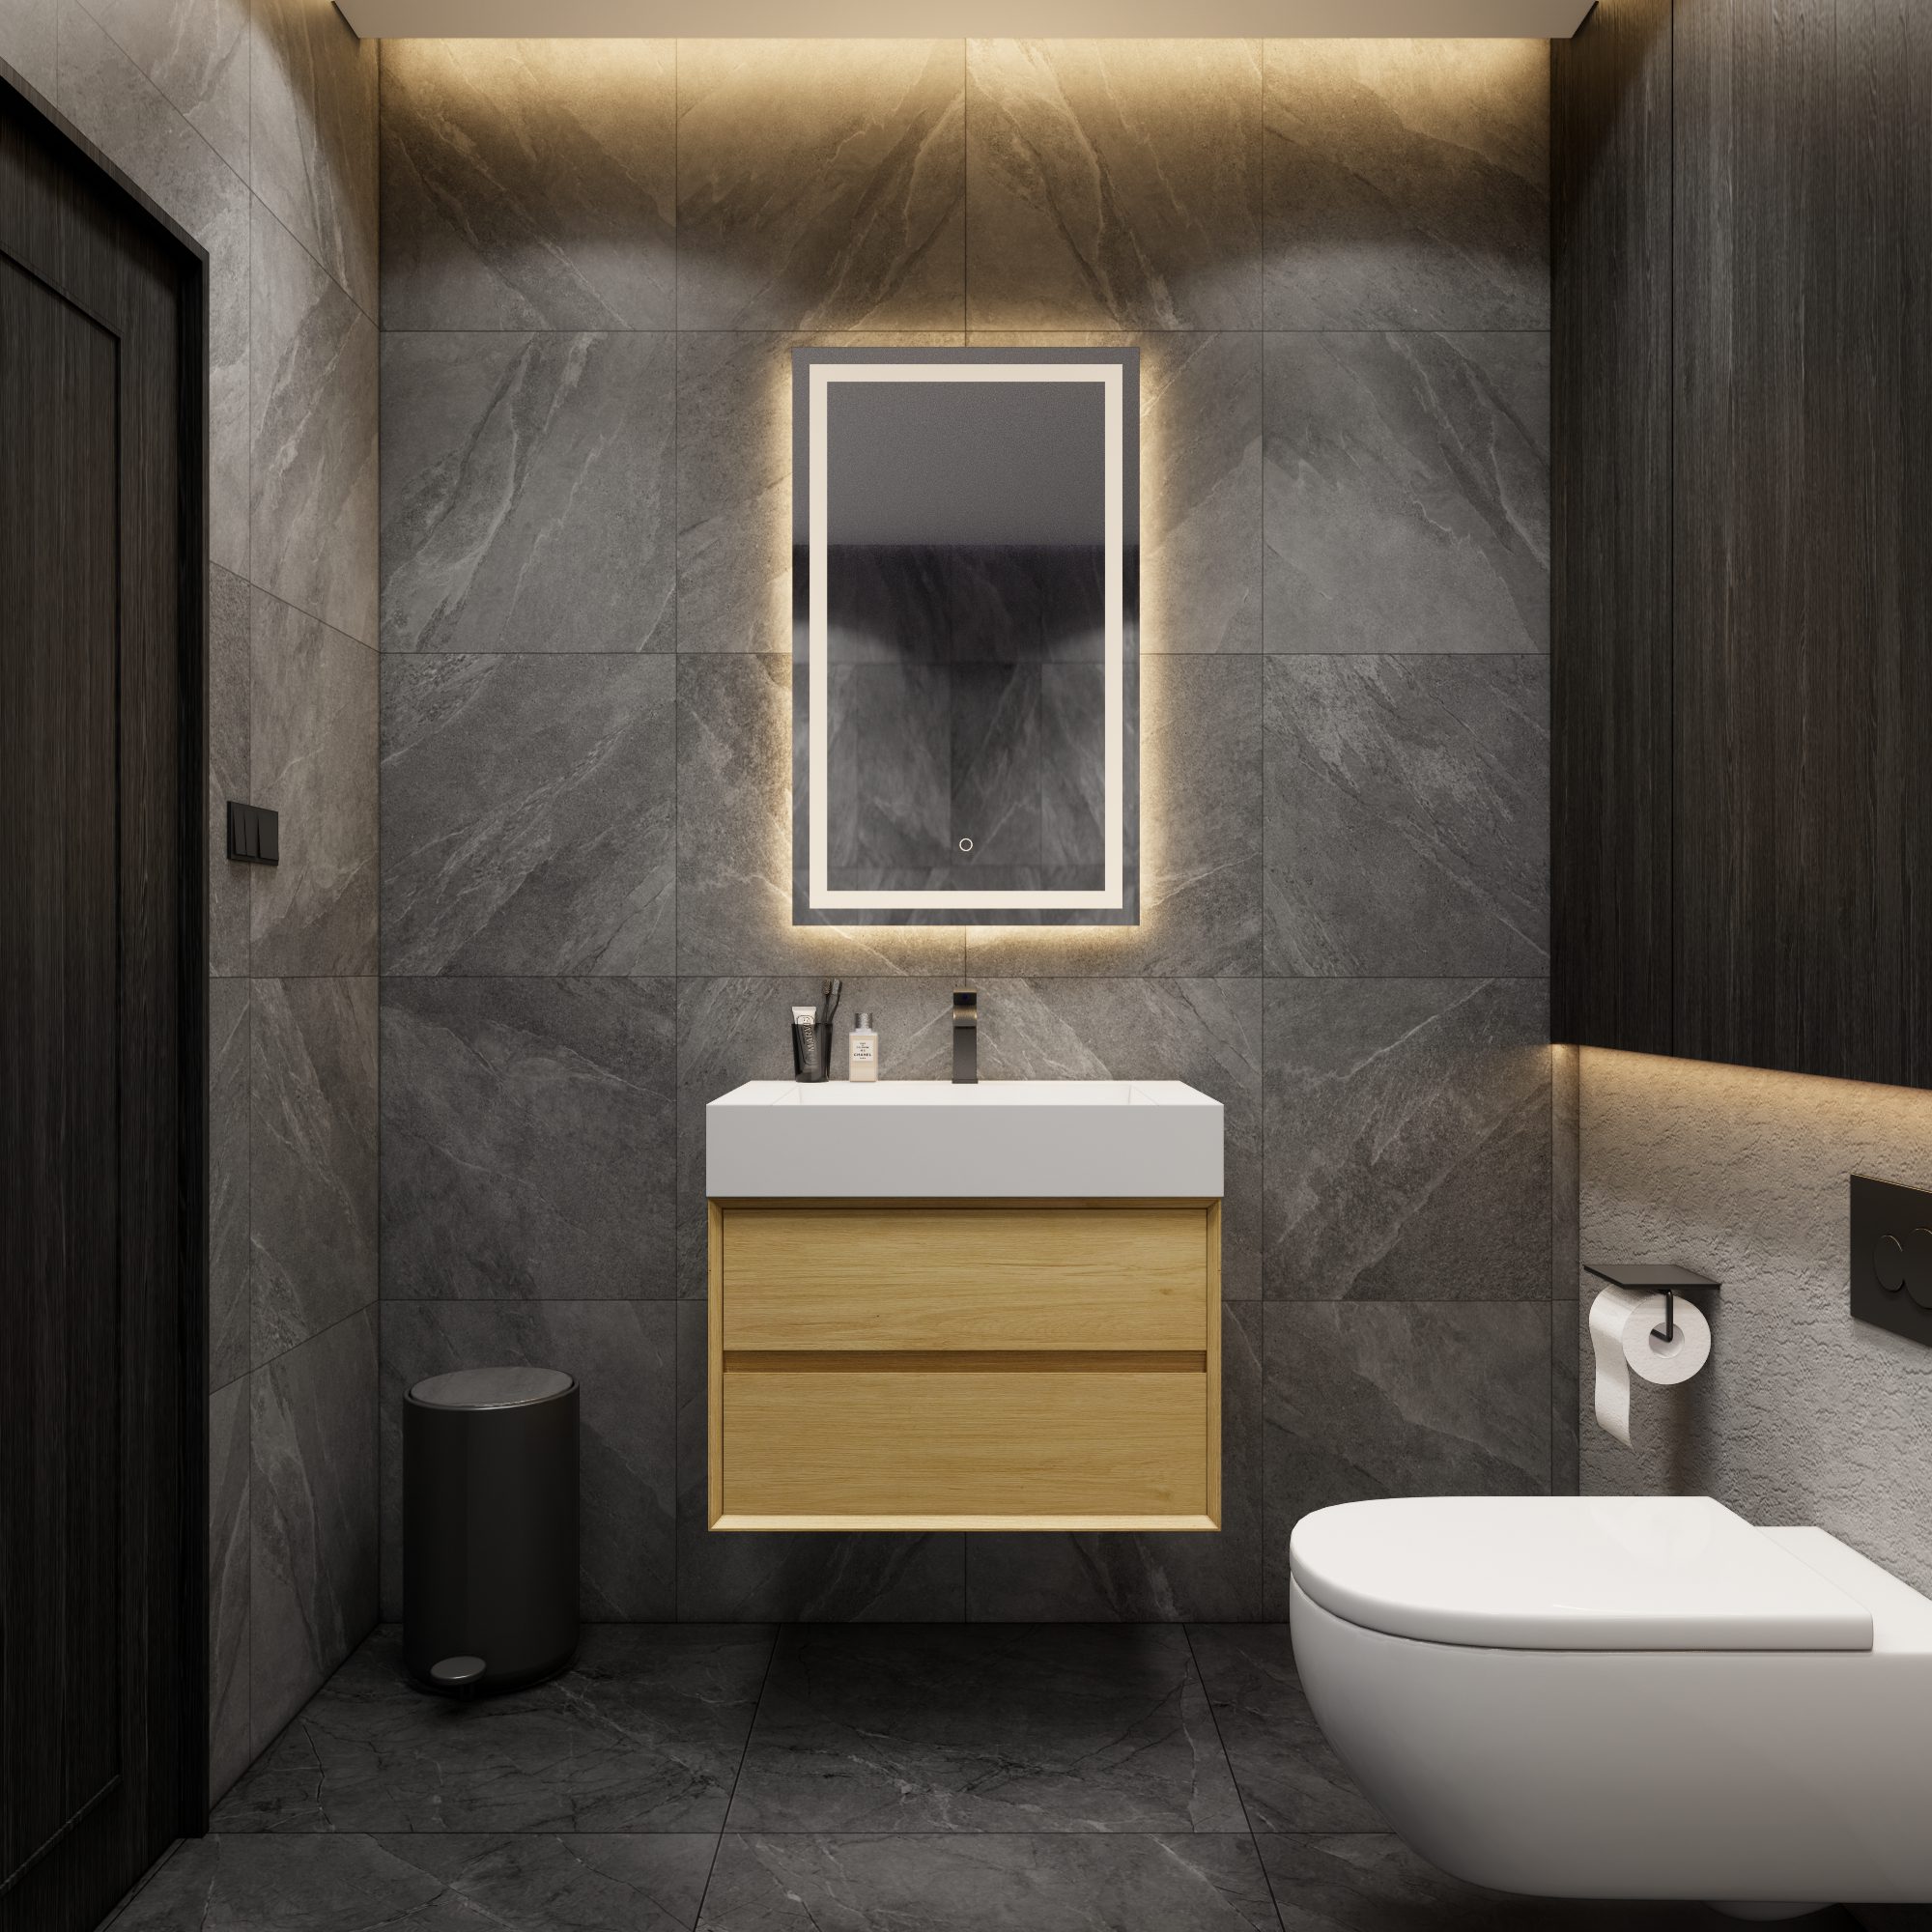 Modern Floating Bathroom Vanity Example. The Max 24" Floating Wall-Mounted Vanity comes in multiple sizes starting at 24" across, as well as in multiple diverse colors from Teak Oak, Gray Oak, Glossy White, Gloss White, and more.